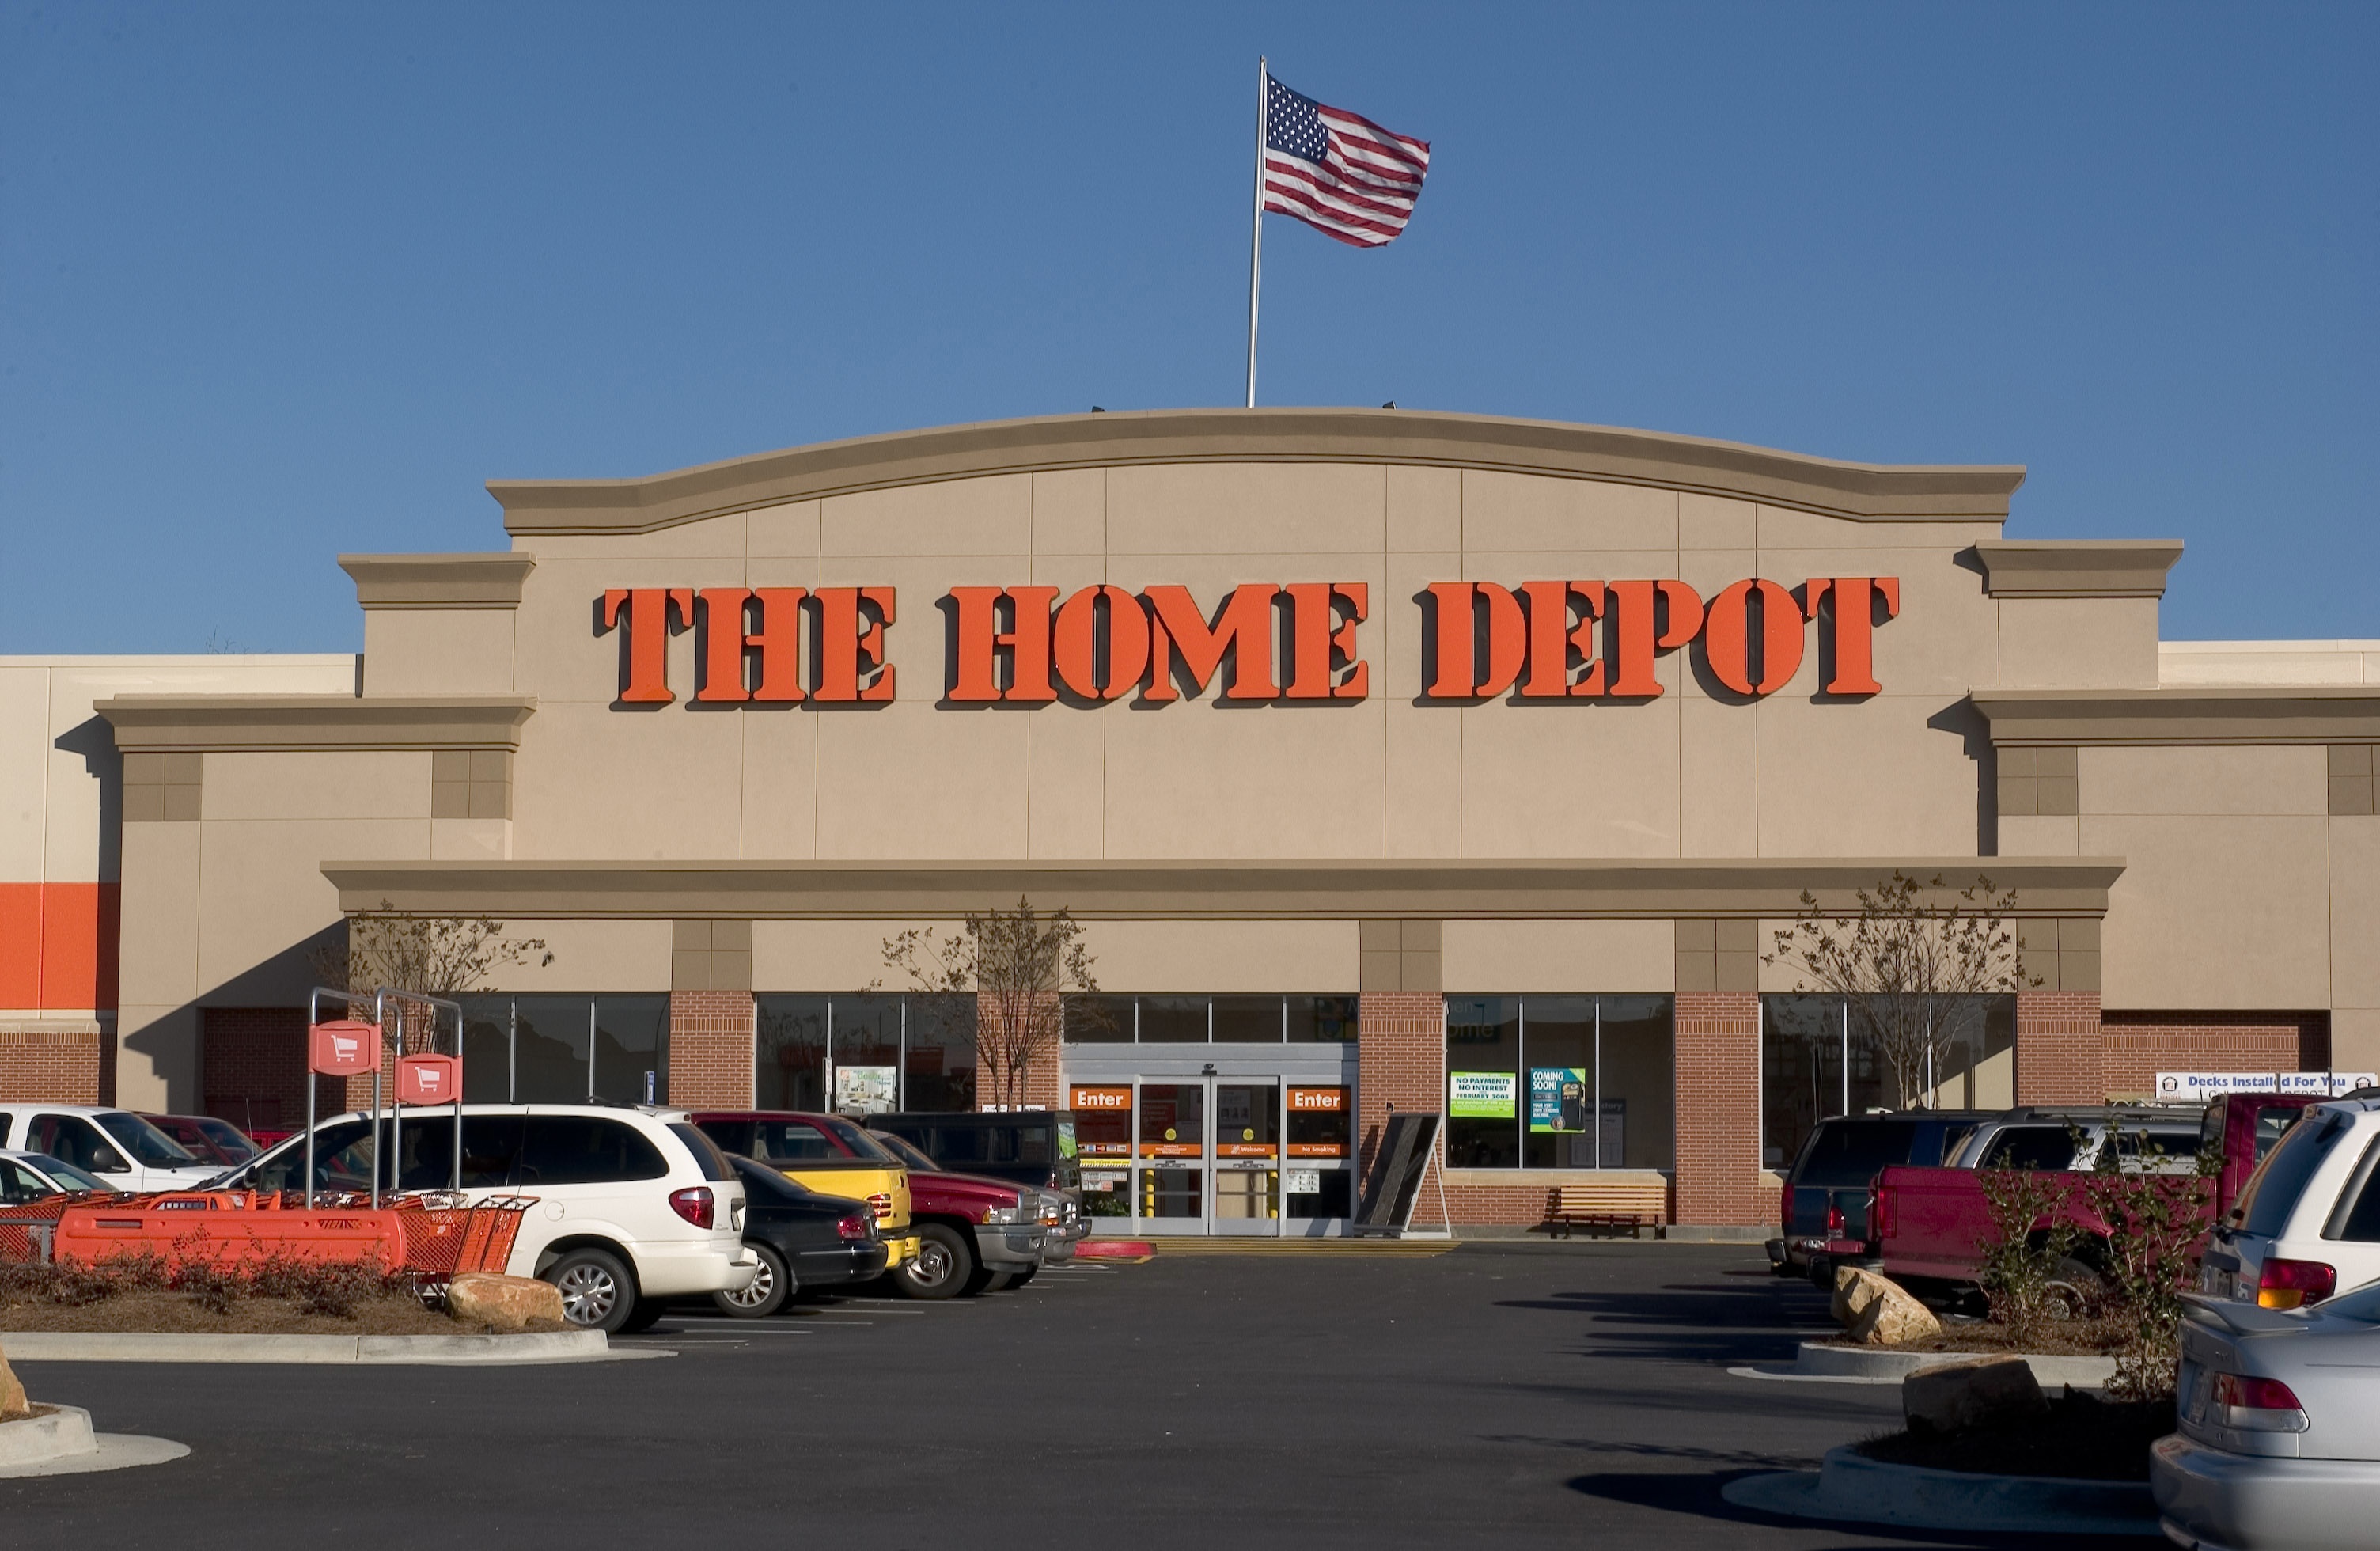 current market price of home depot stock